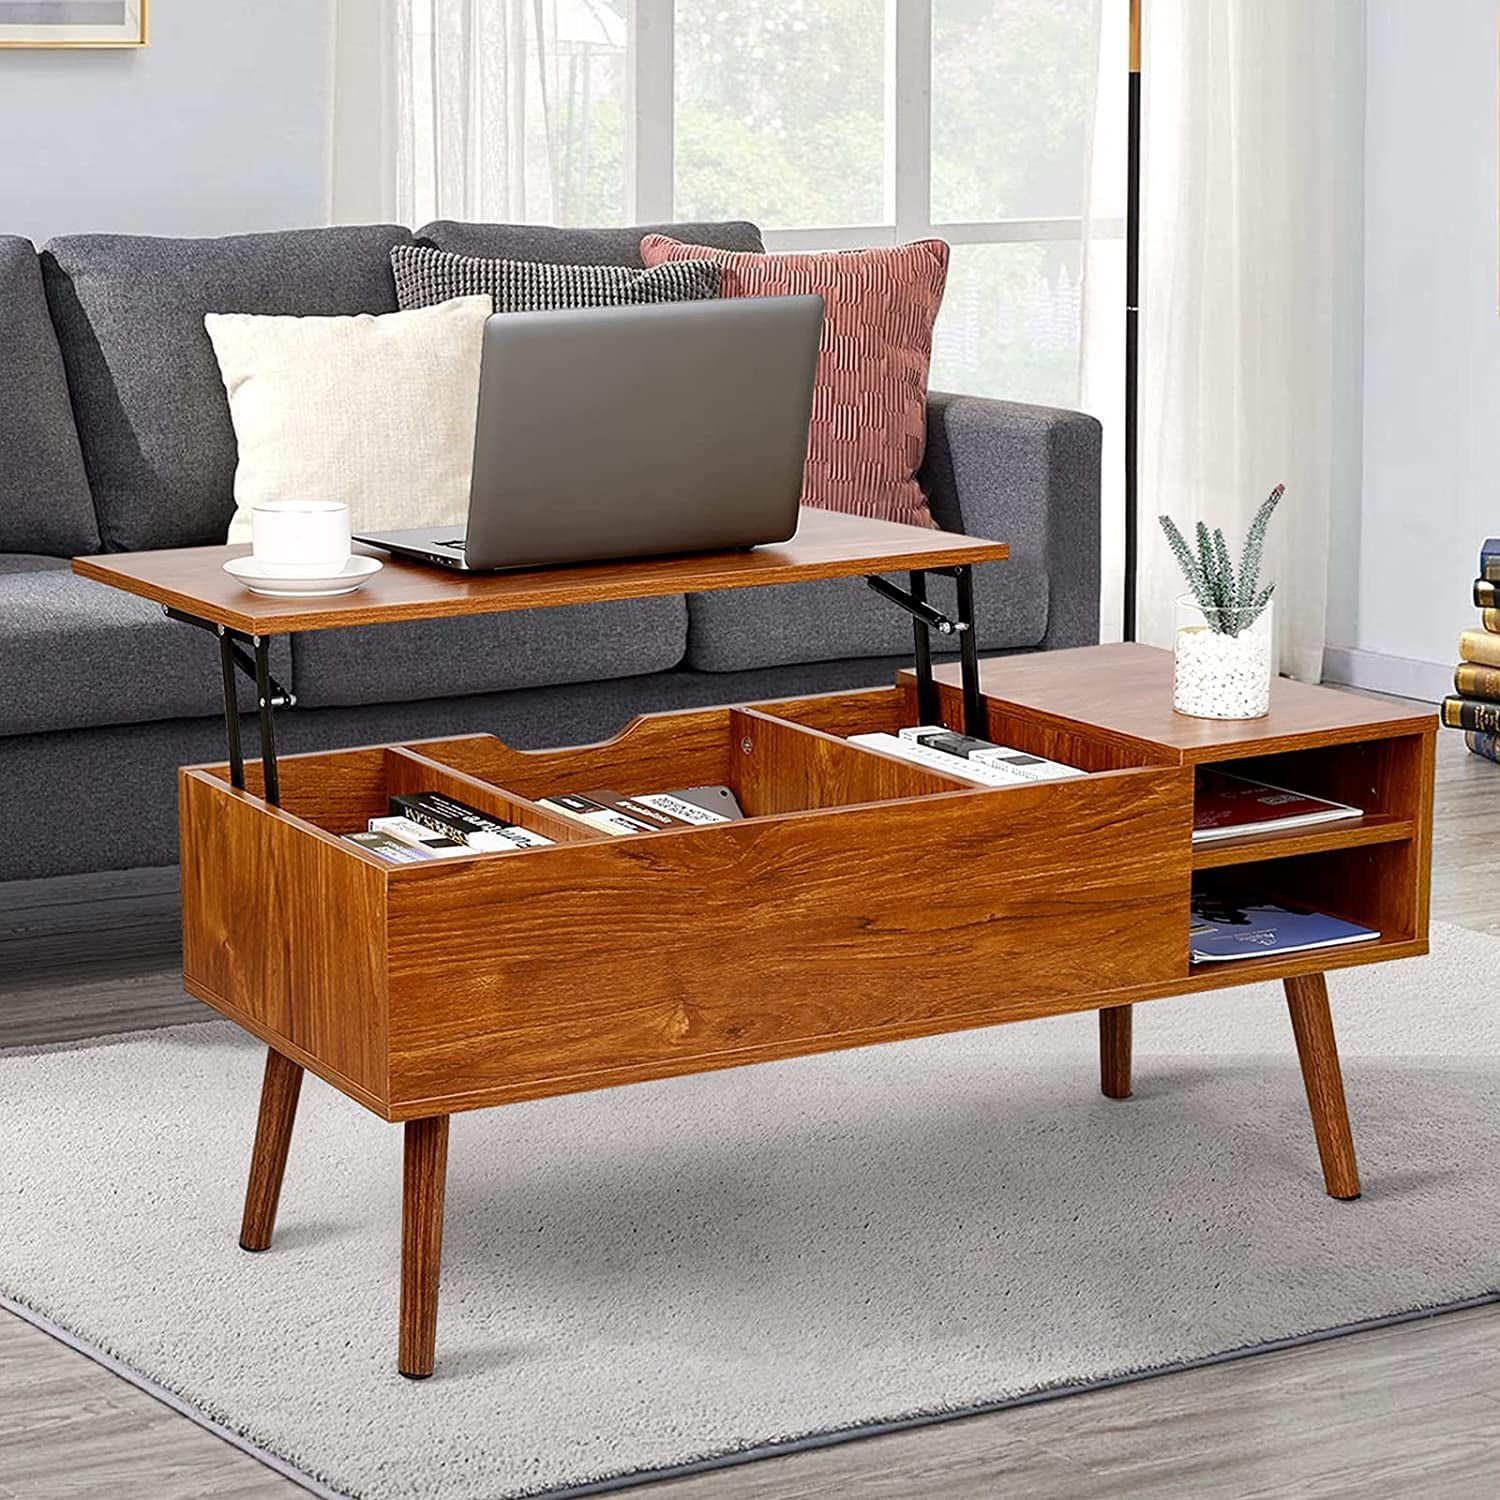 Modern Lift Top Coffee Table With Hidden Compartment Storage,adjustable With Coffee Tables With Hidden Compartments (Gallery 4 of 20)